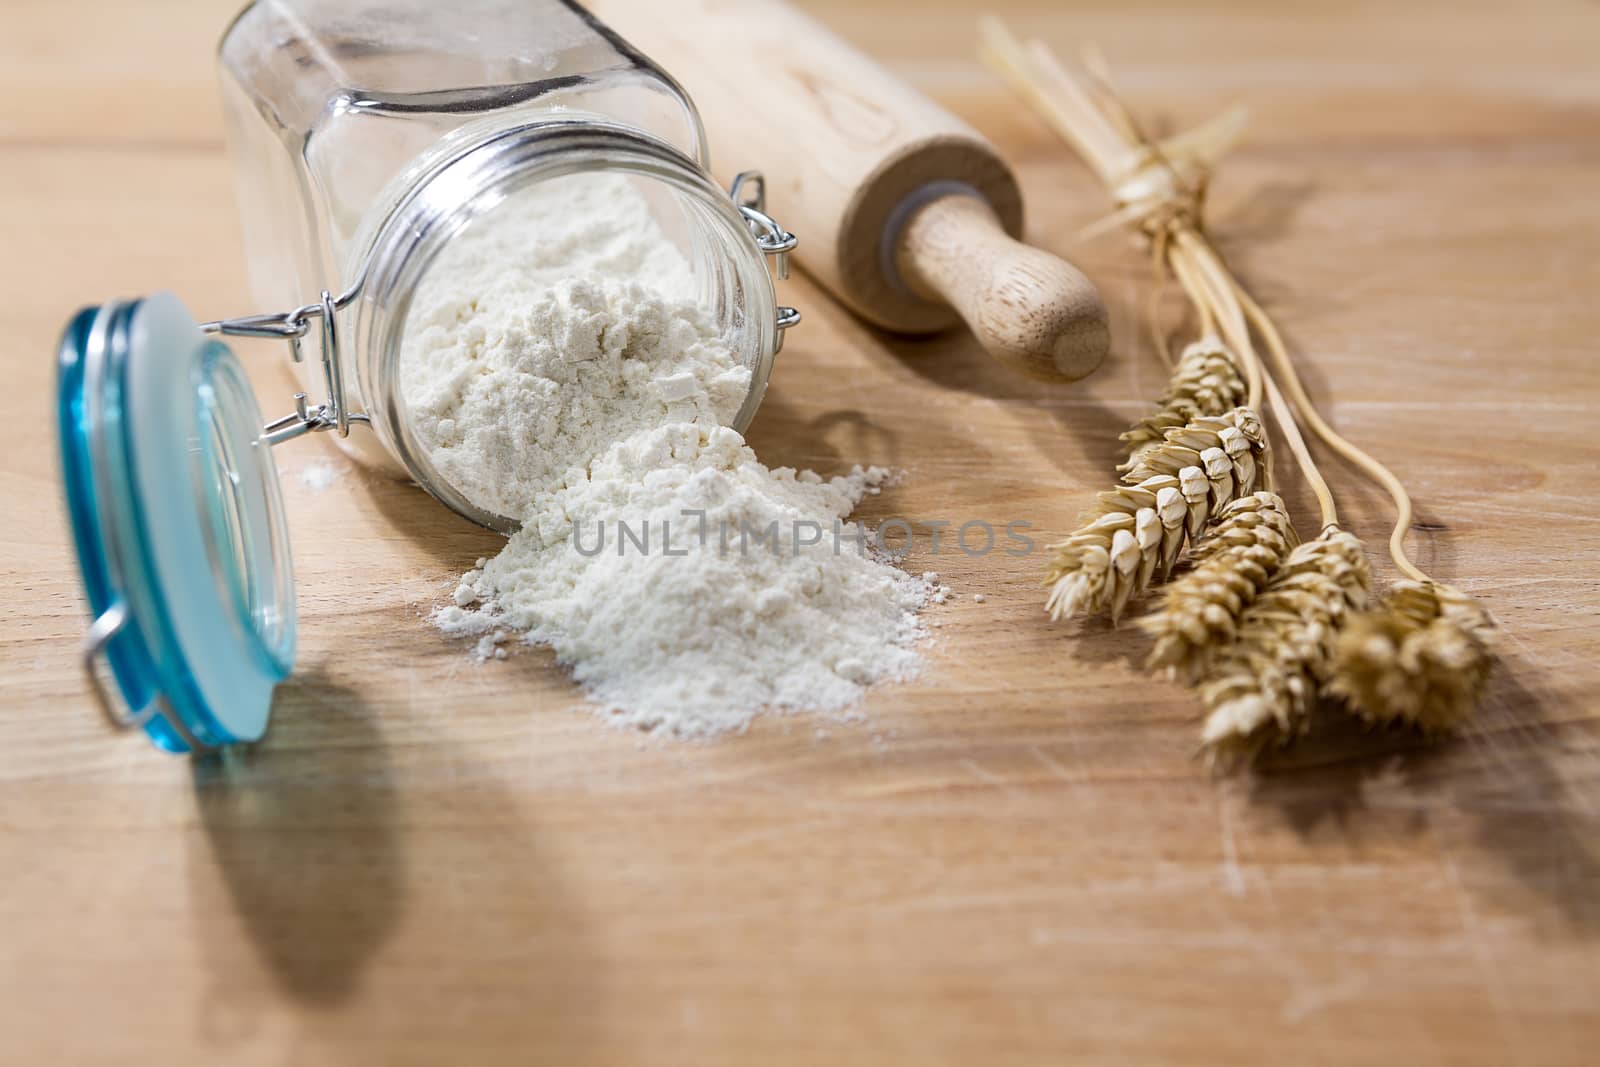 Flour in glass jar with rolling pin and sheaves of wheat on a table